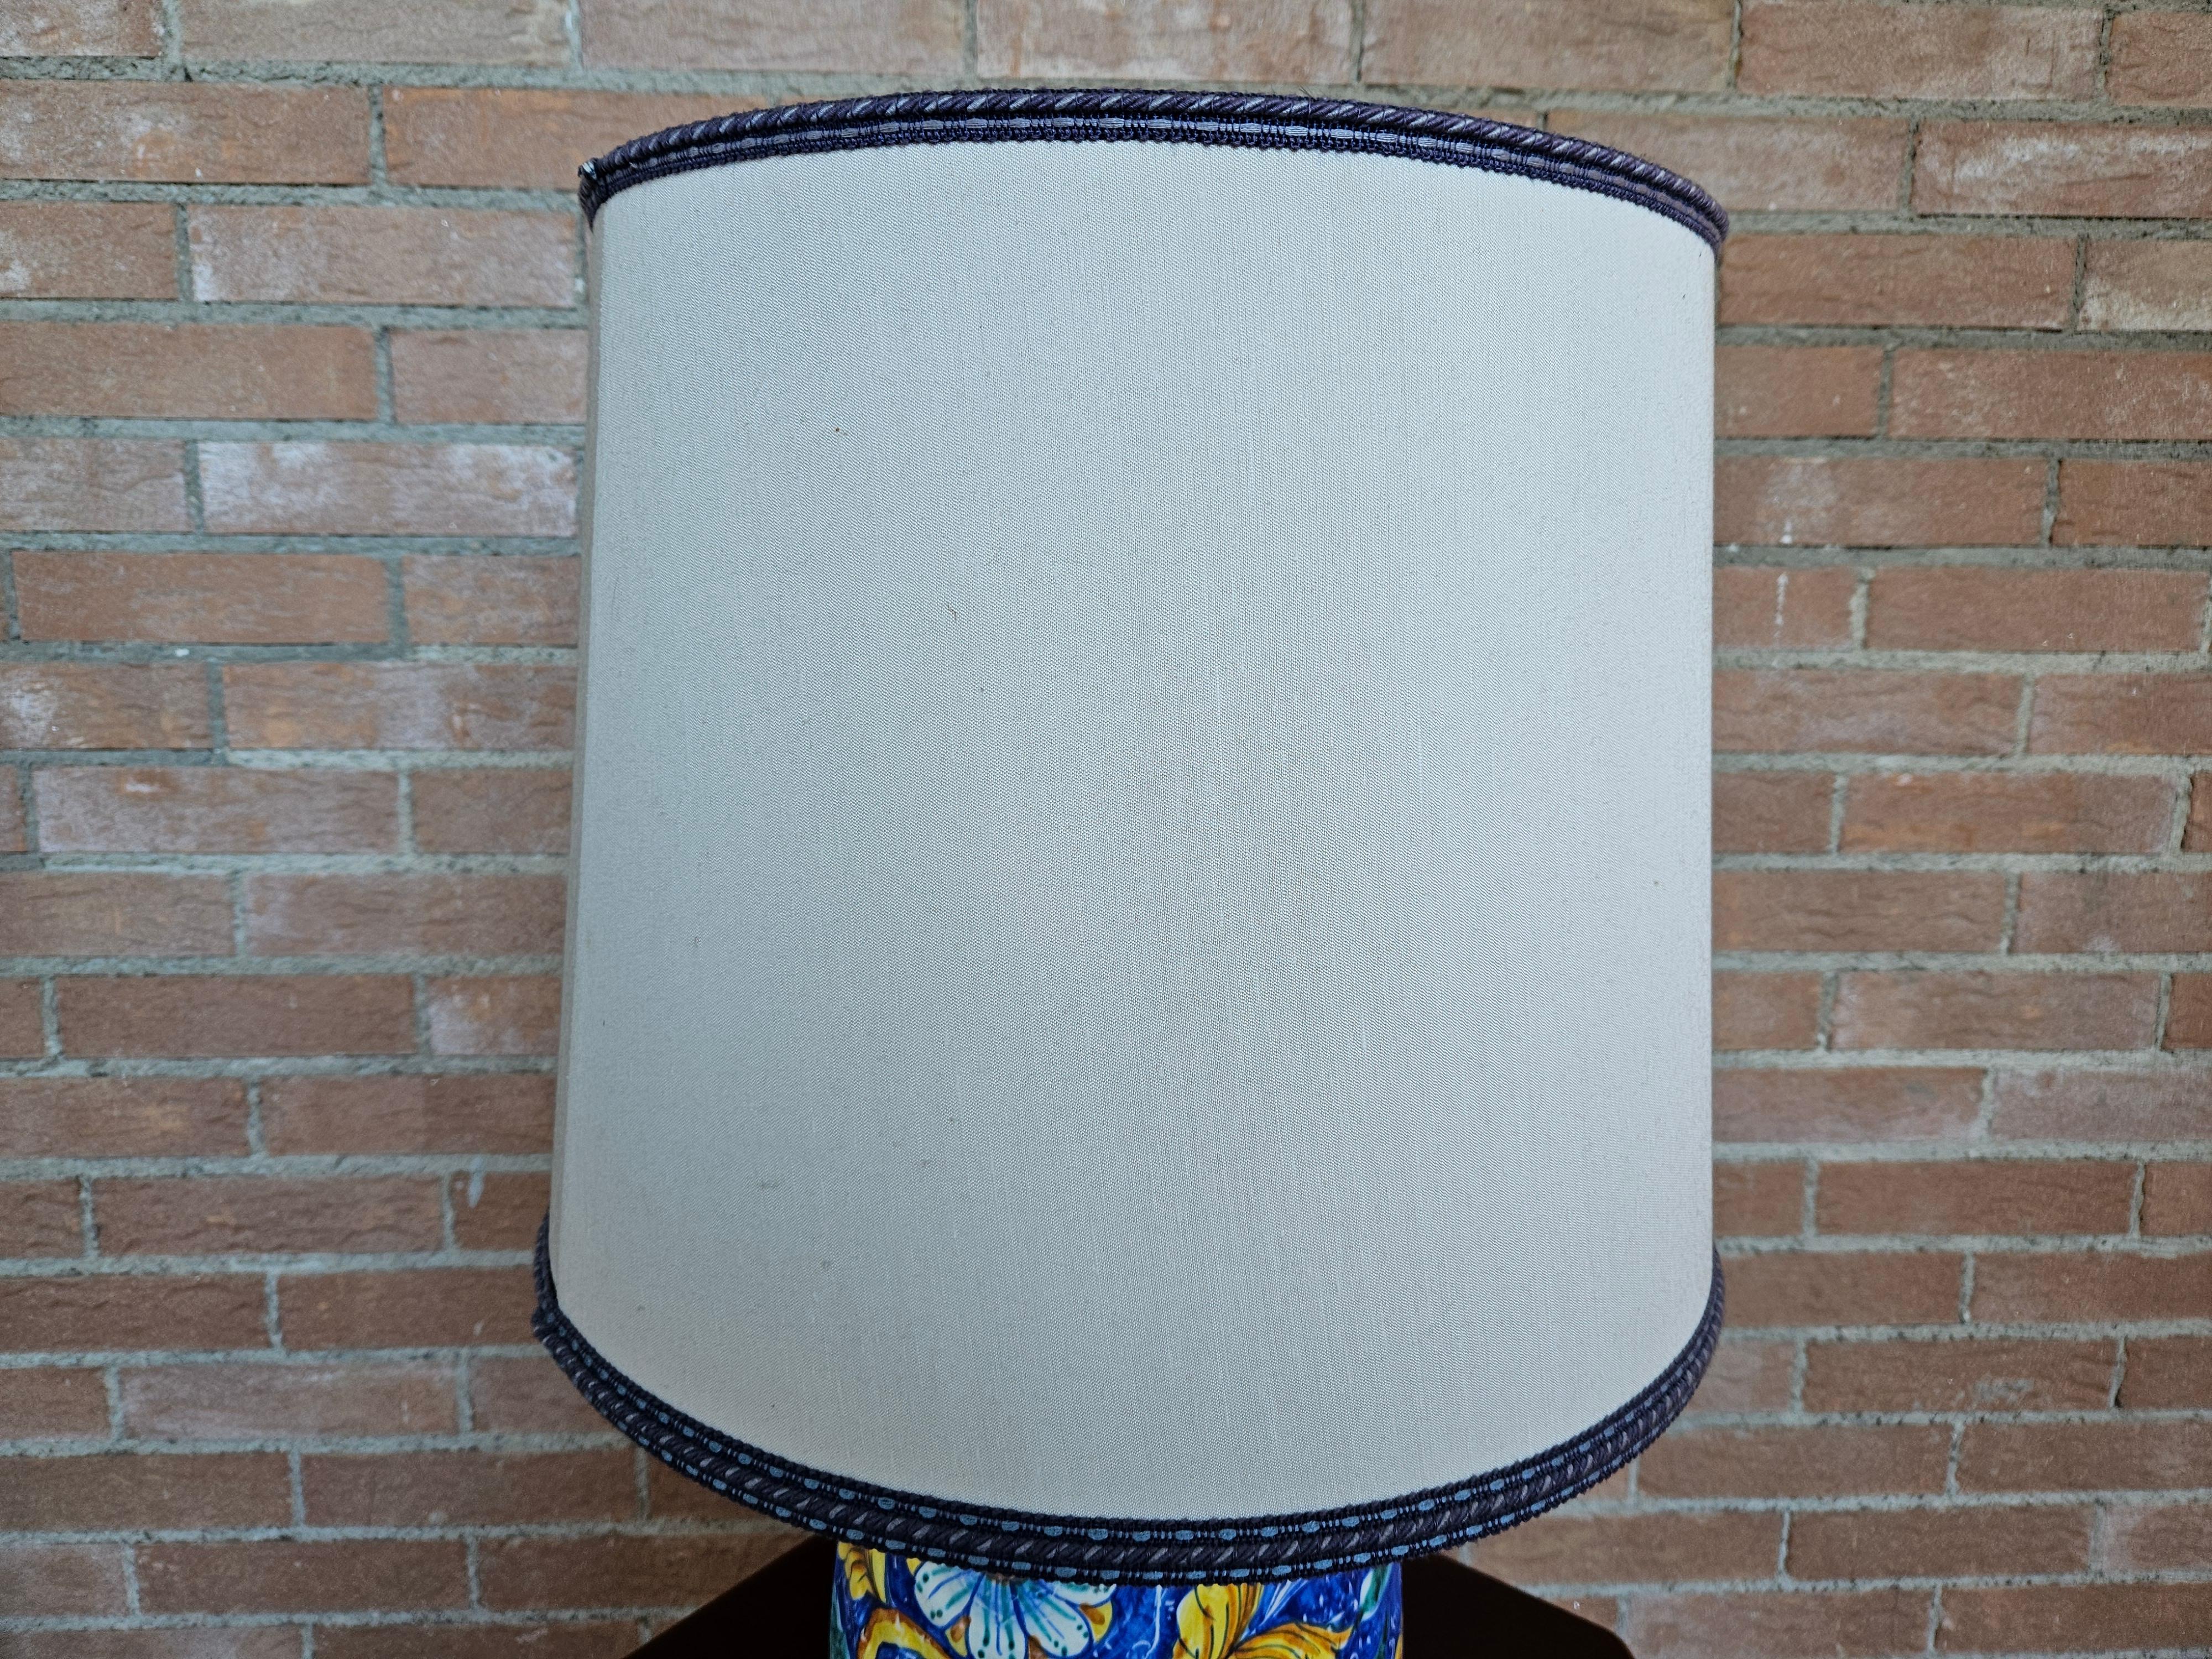 Colorful and lively painted ceramic table lamp with cream fabric shade and blue decorations.

Bulb not included.
